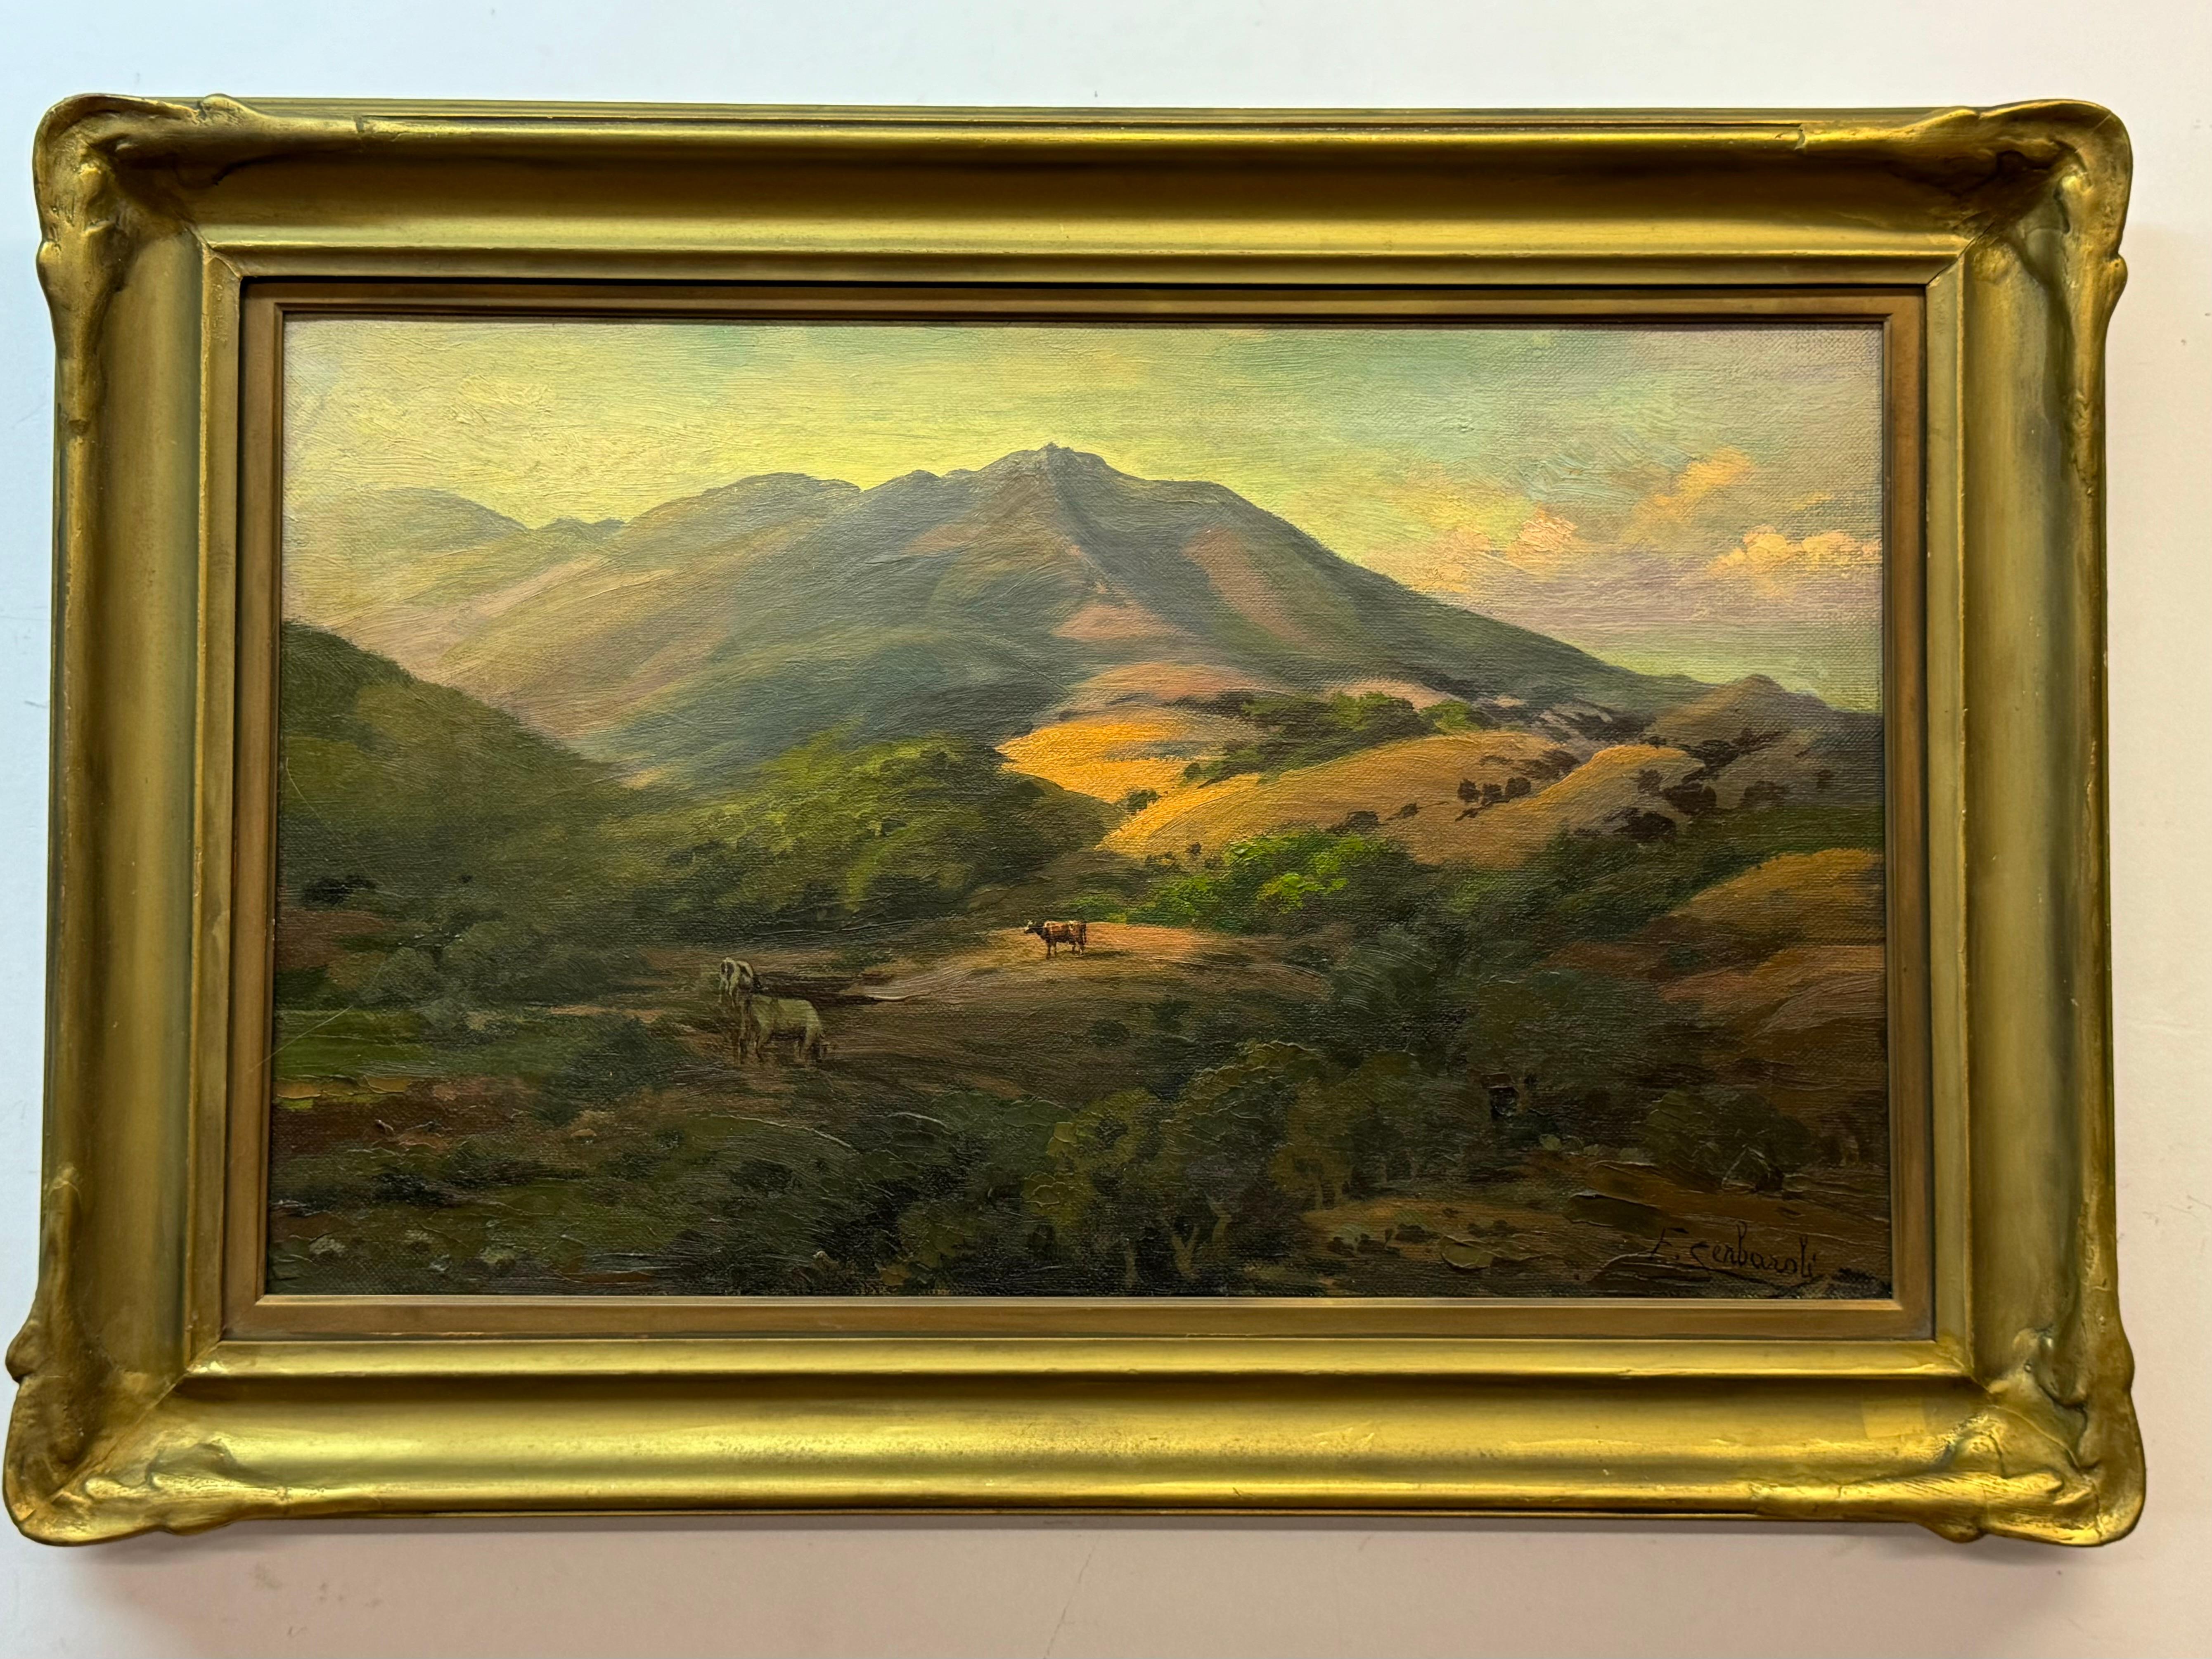 Hector Ettore Serbaroli Landscape Painting - Mt. Tam in Marin County Landscape with Cattle